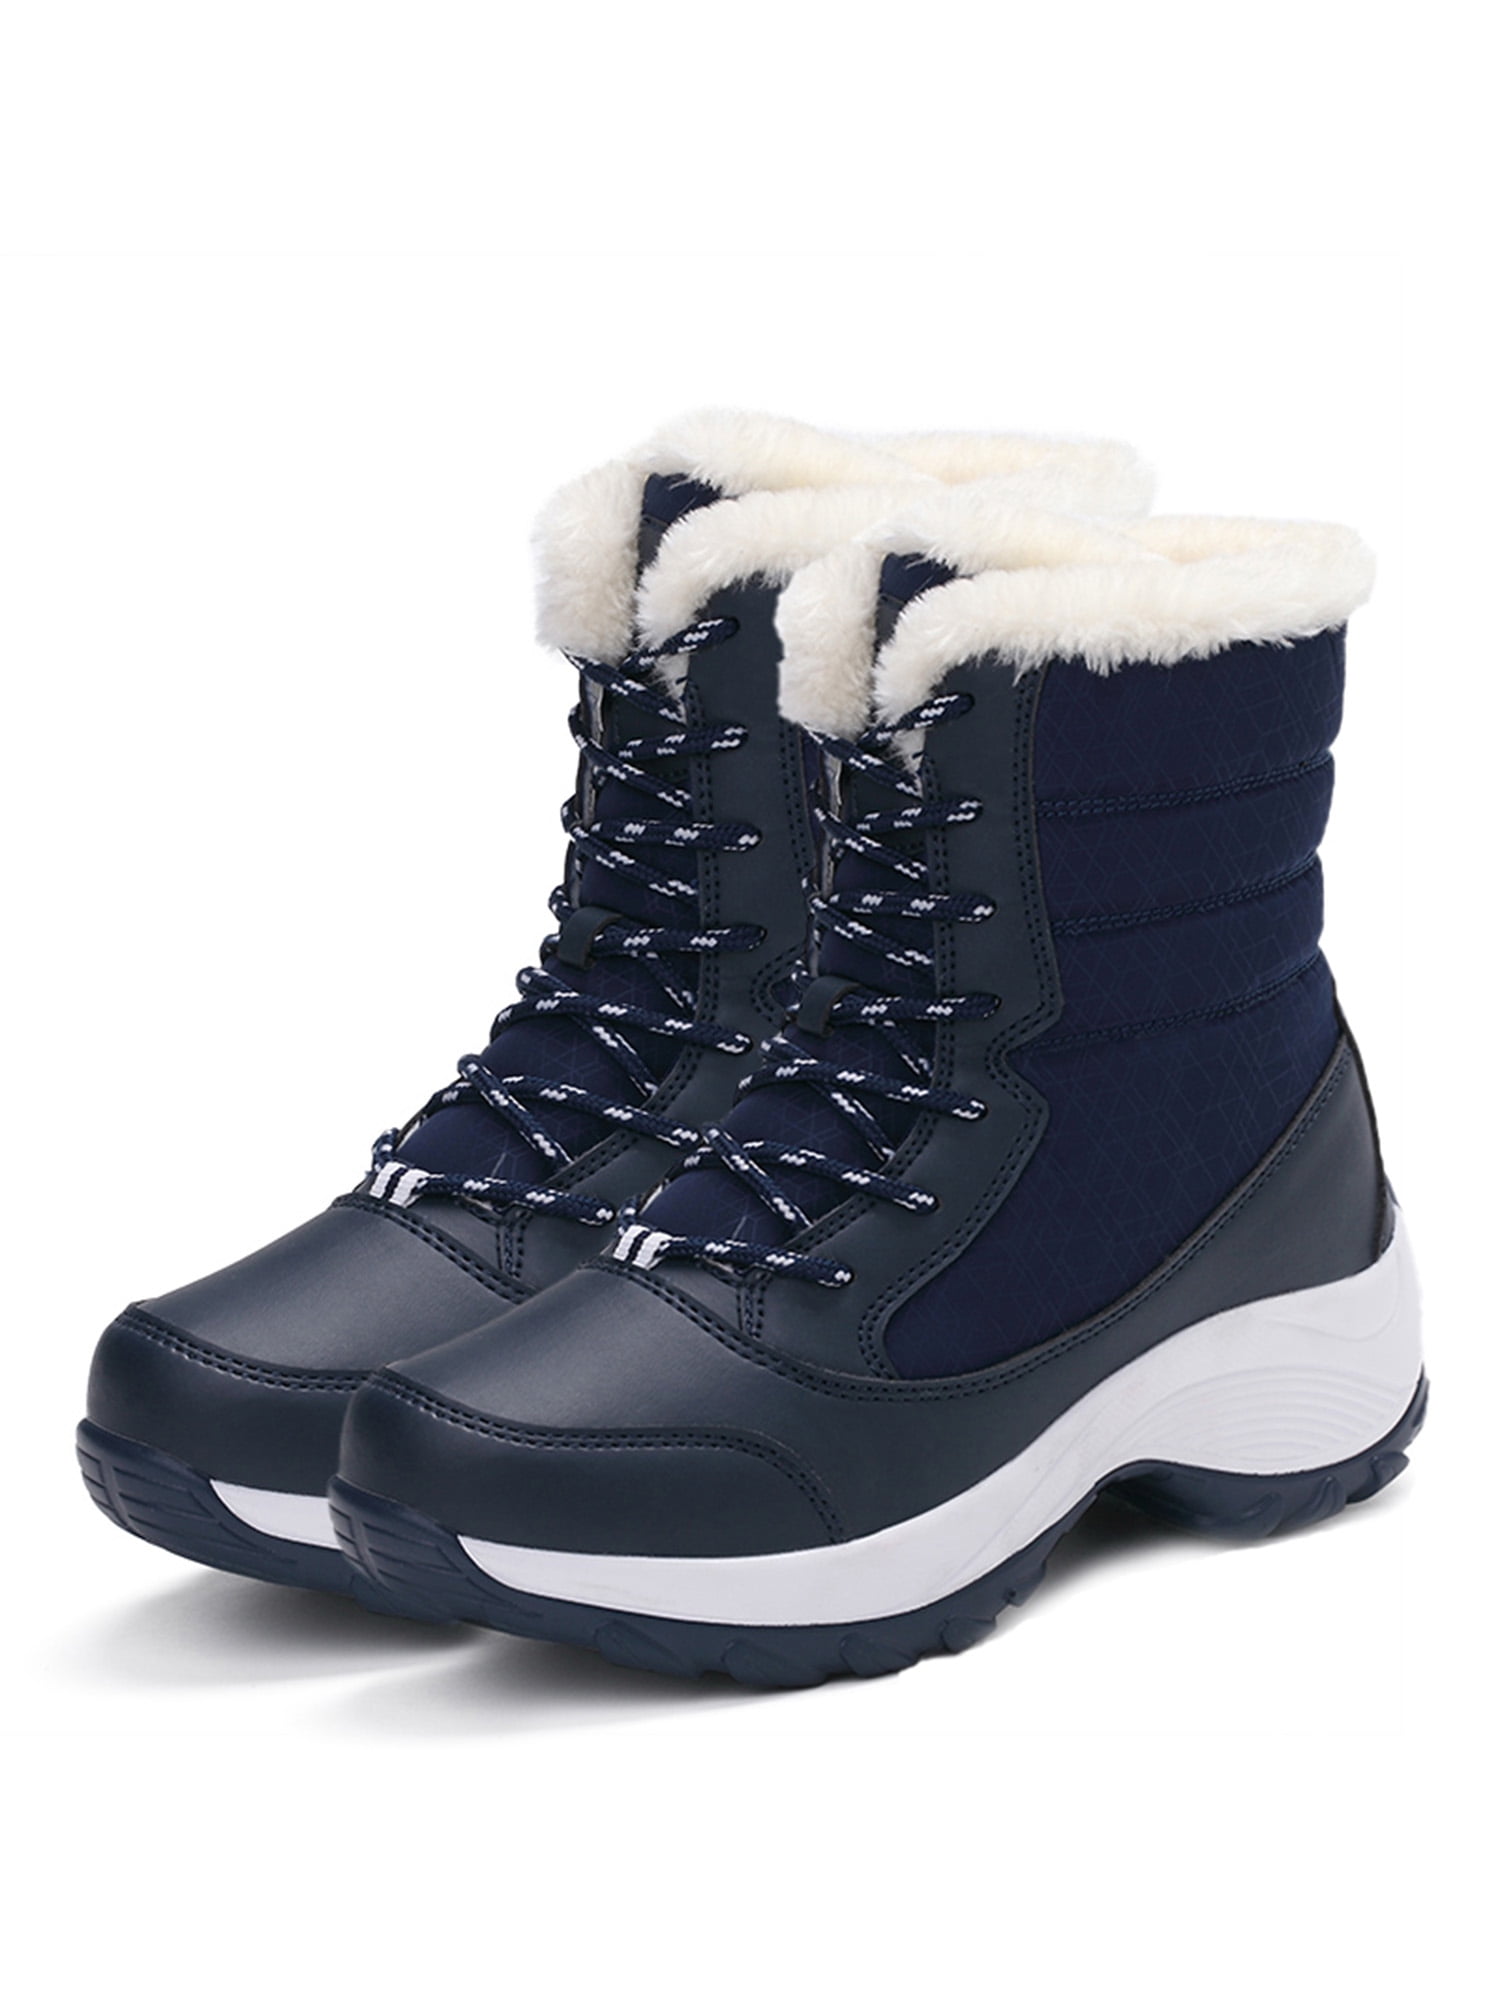 Women Winter Boots For Ladies With Plush Female Shoe Waterproof Snow Shoes